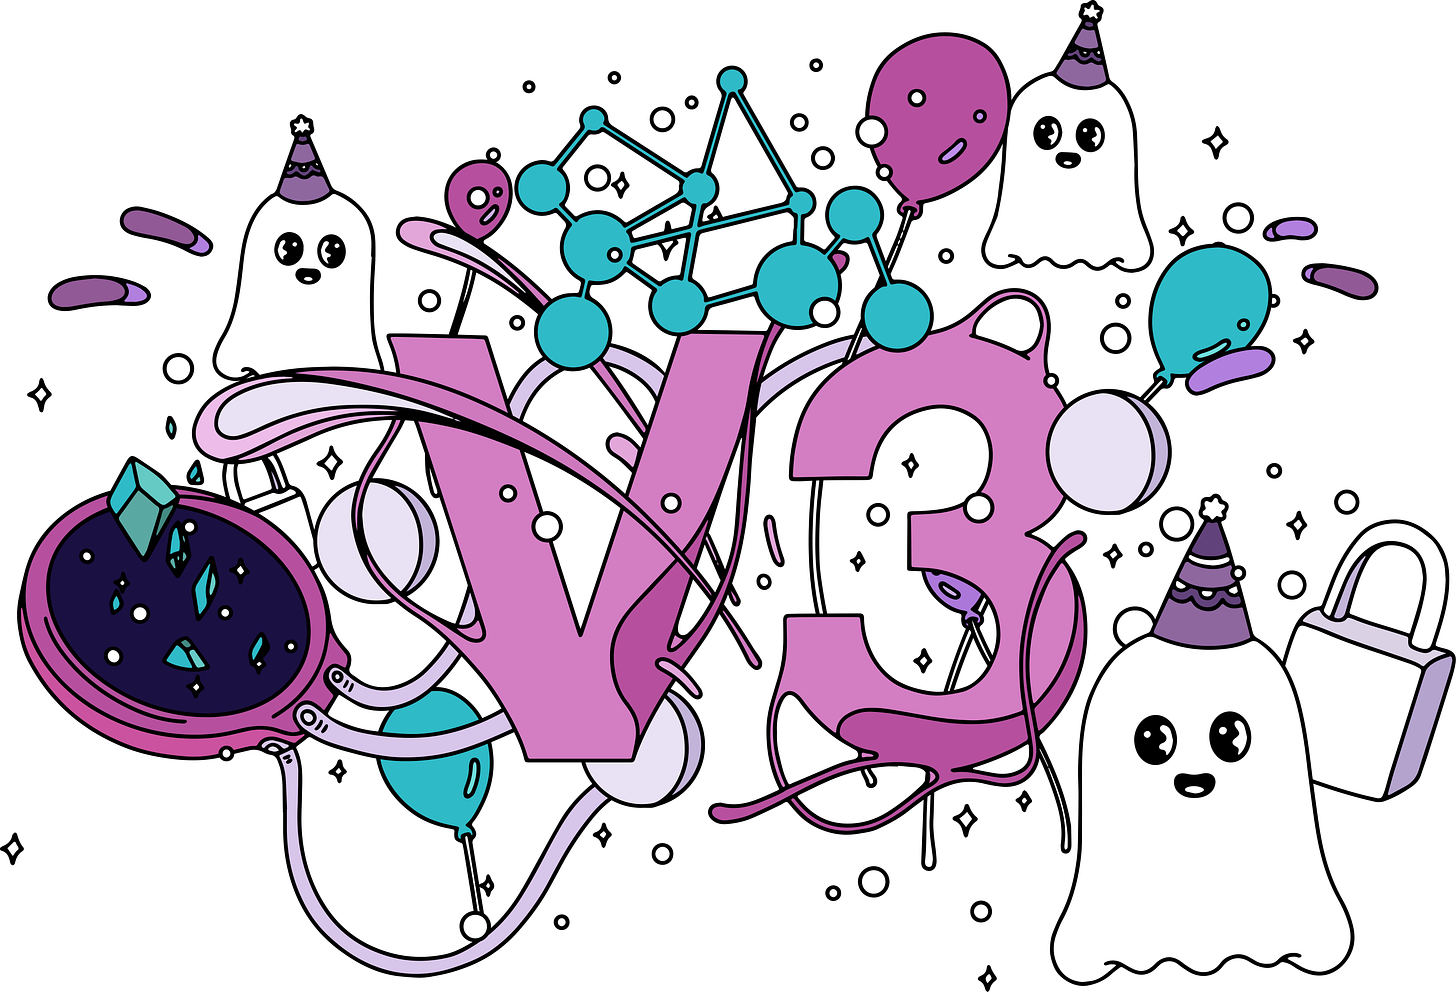 Aave V3 Graphic with Festive Ghosts